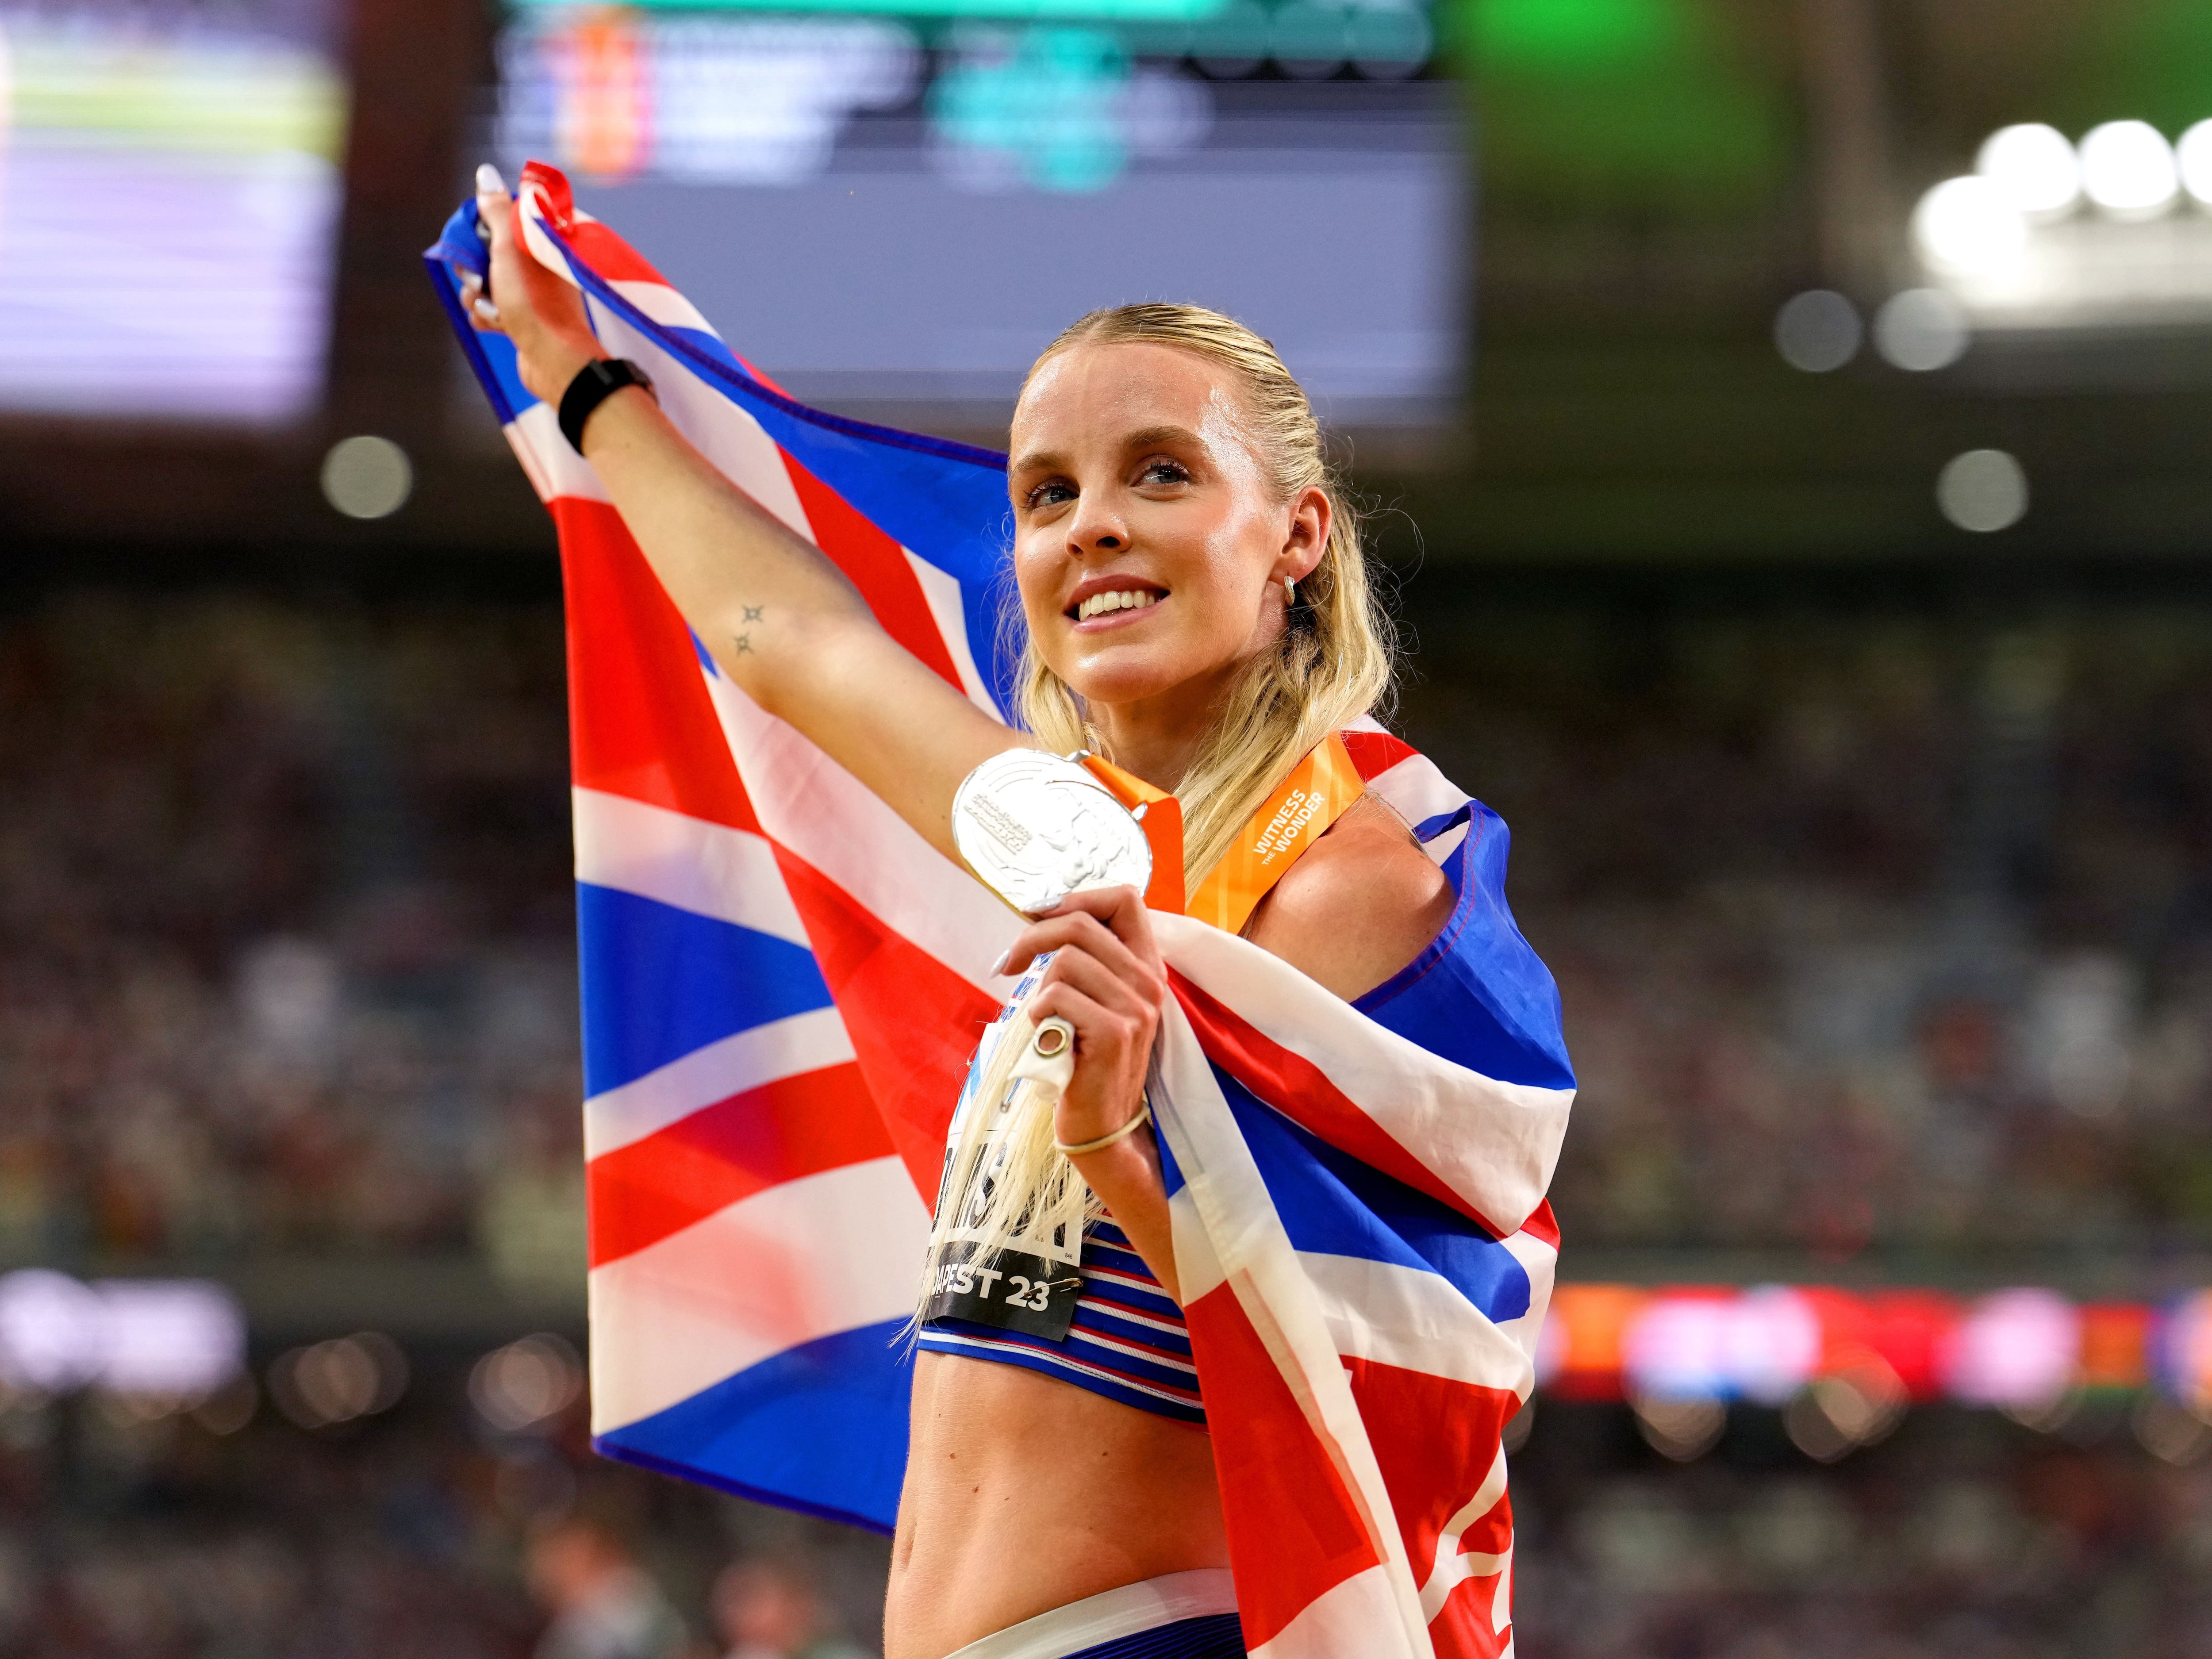 Keely Hodgkinson sends ‘anything can happen’ warning ahead of bid for 800m gold